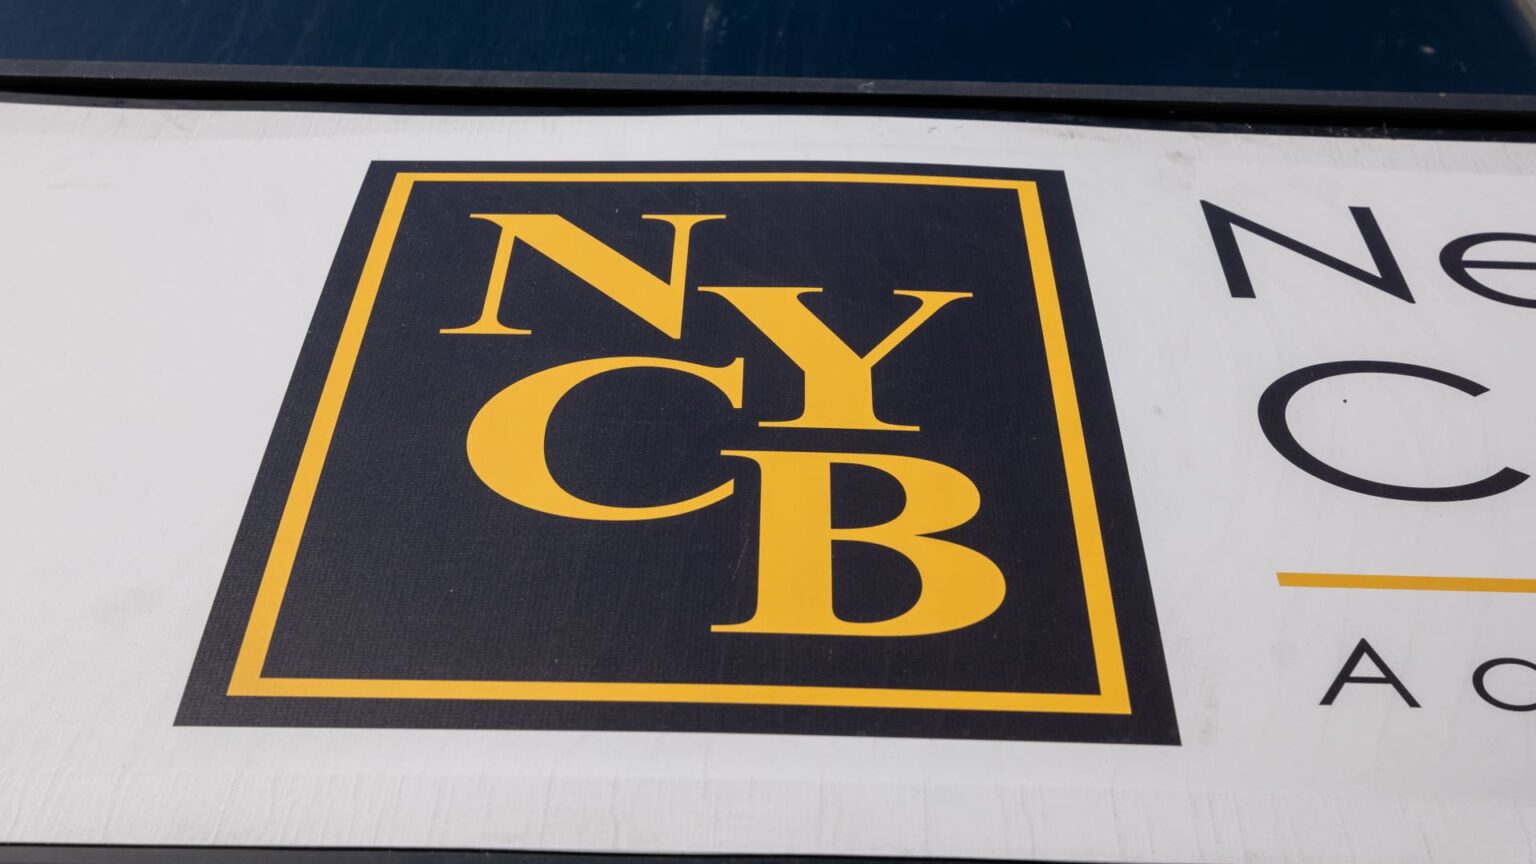 NYCB shares jump 30%, CEO gives plan for 'clear path to profitability'